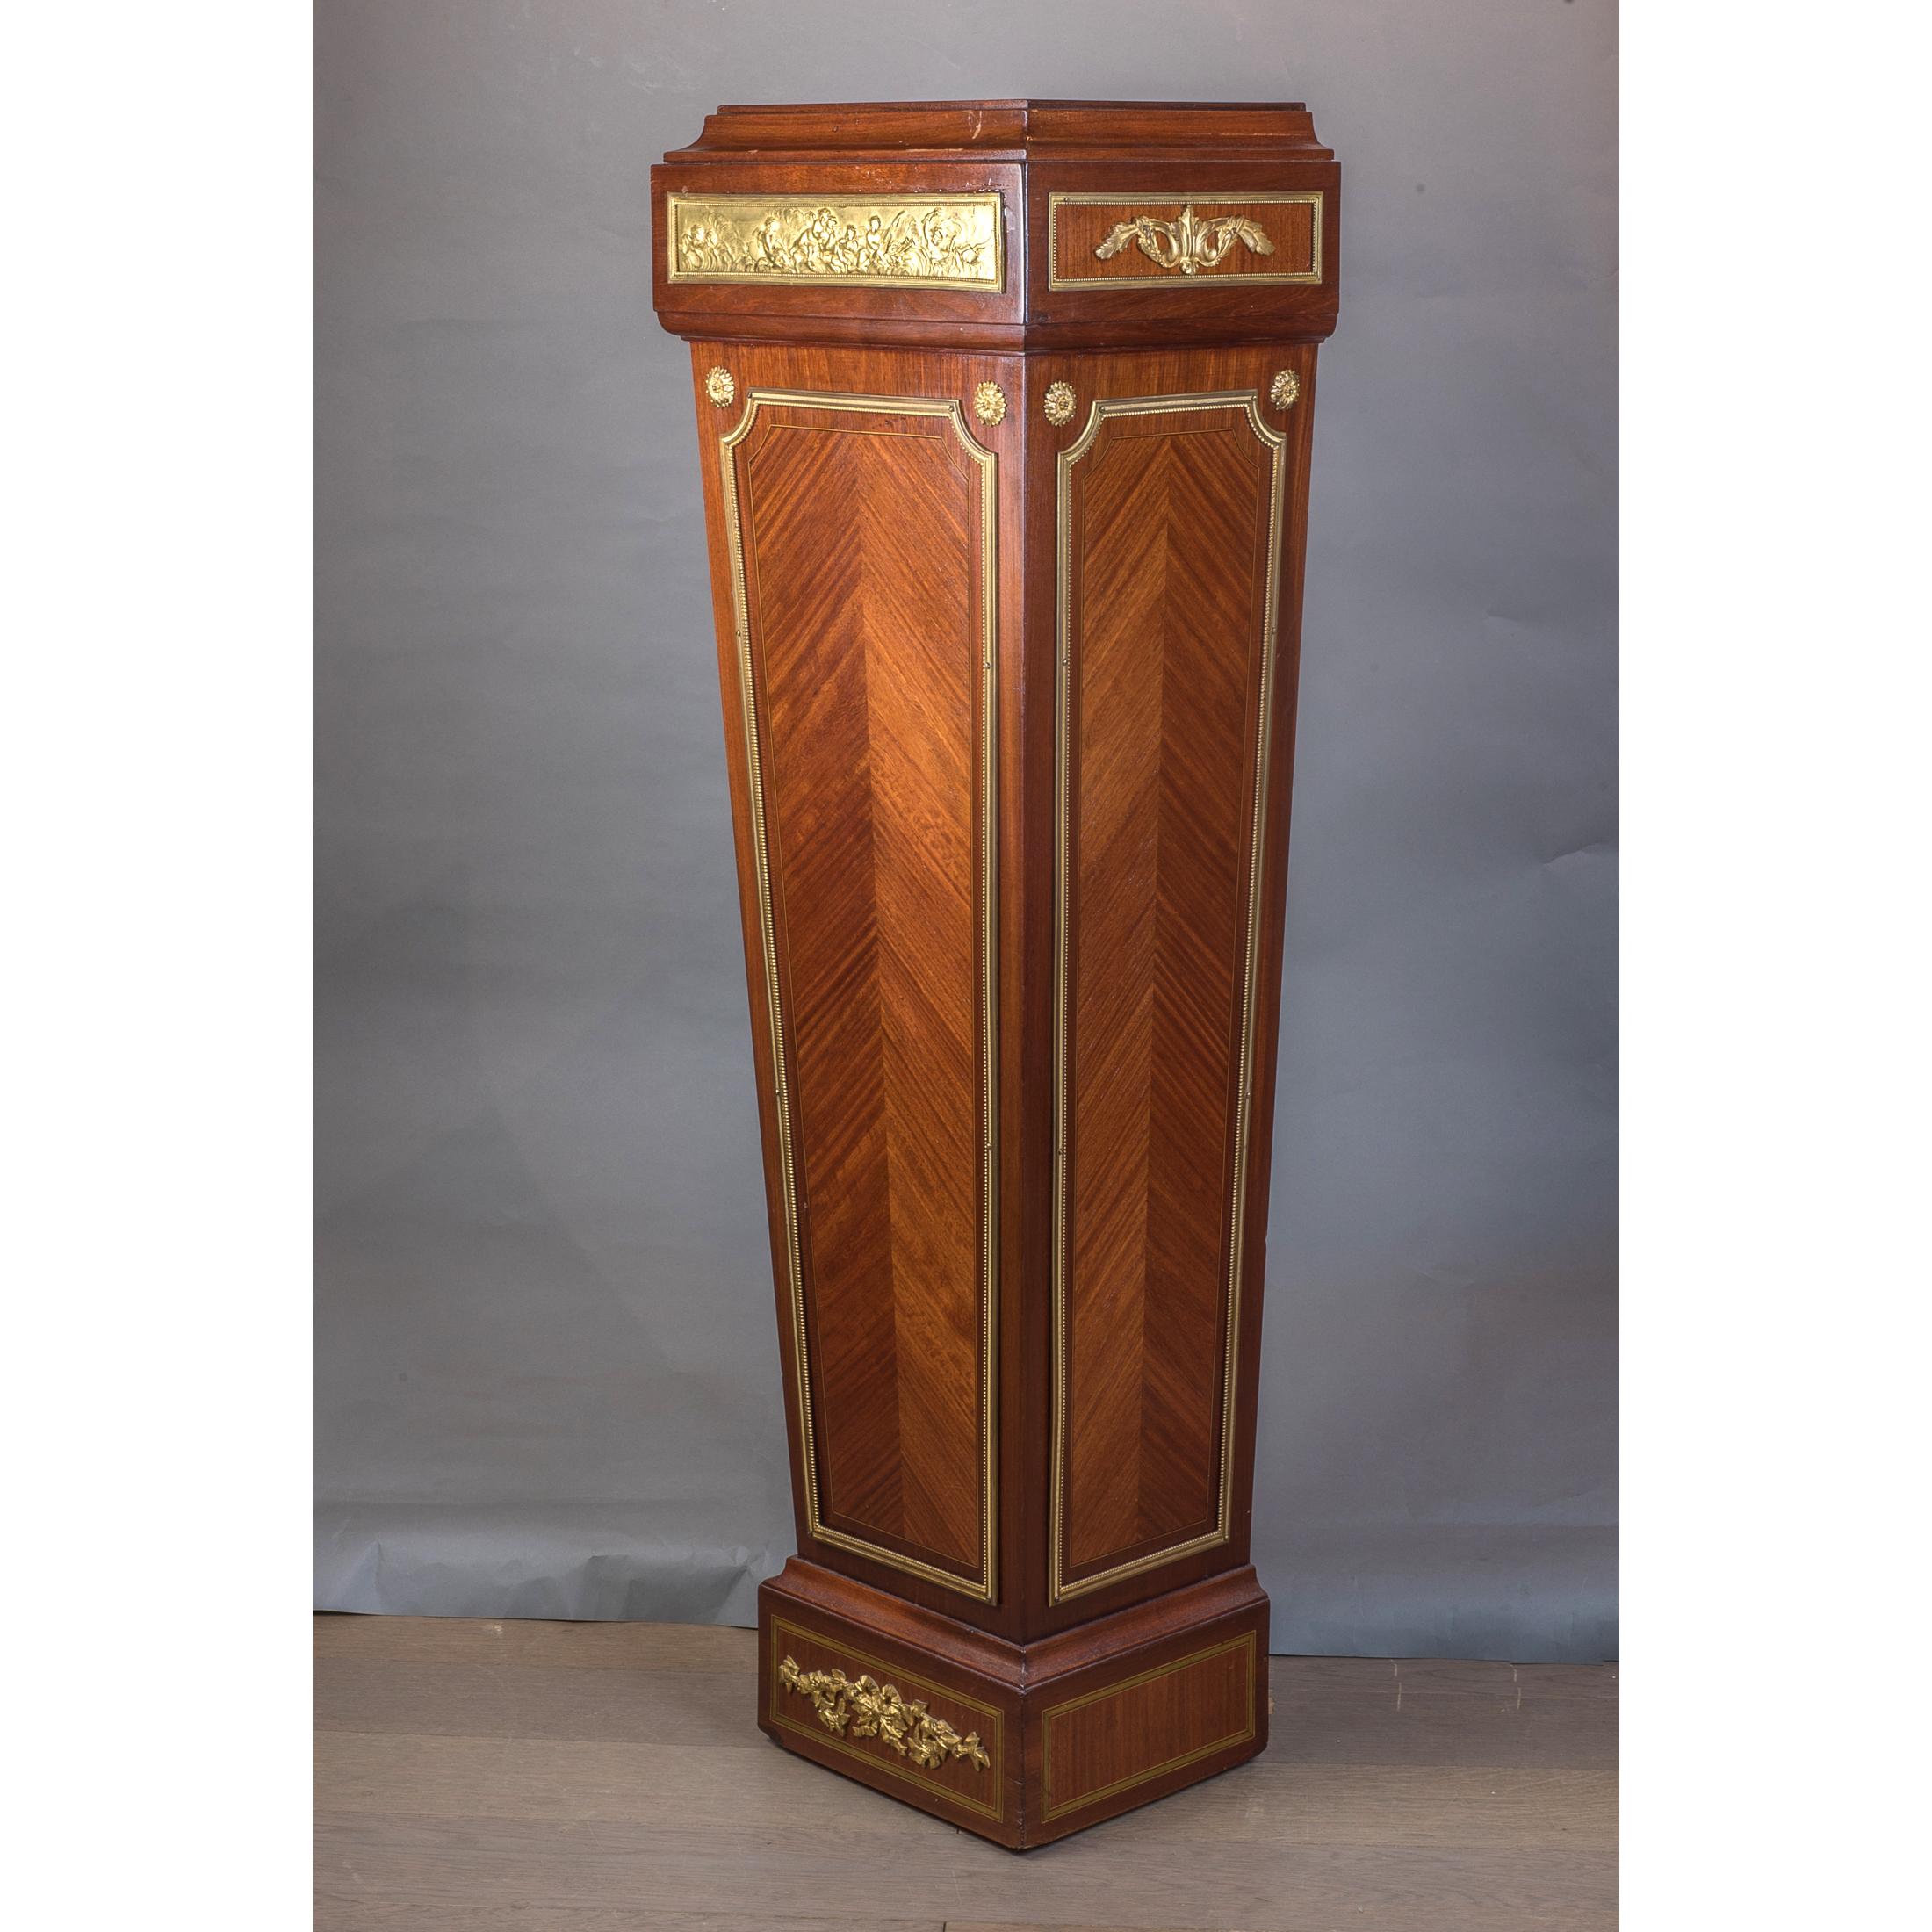 Gorgeous Mahogany wood pedestals with guilt bronze ornamentation. Rectangular golden plaques depicting cherubs playing instruments and relaxing in the clouds decorate the front face of the pedestal. 

Origin: French
Date: 19th century
Dimension: